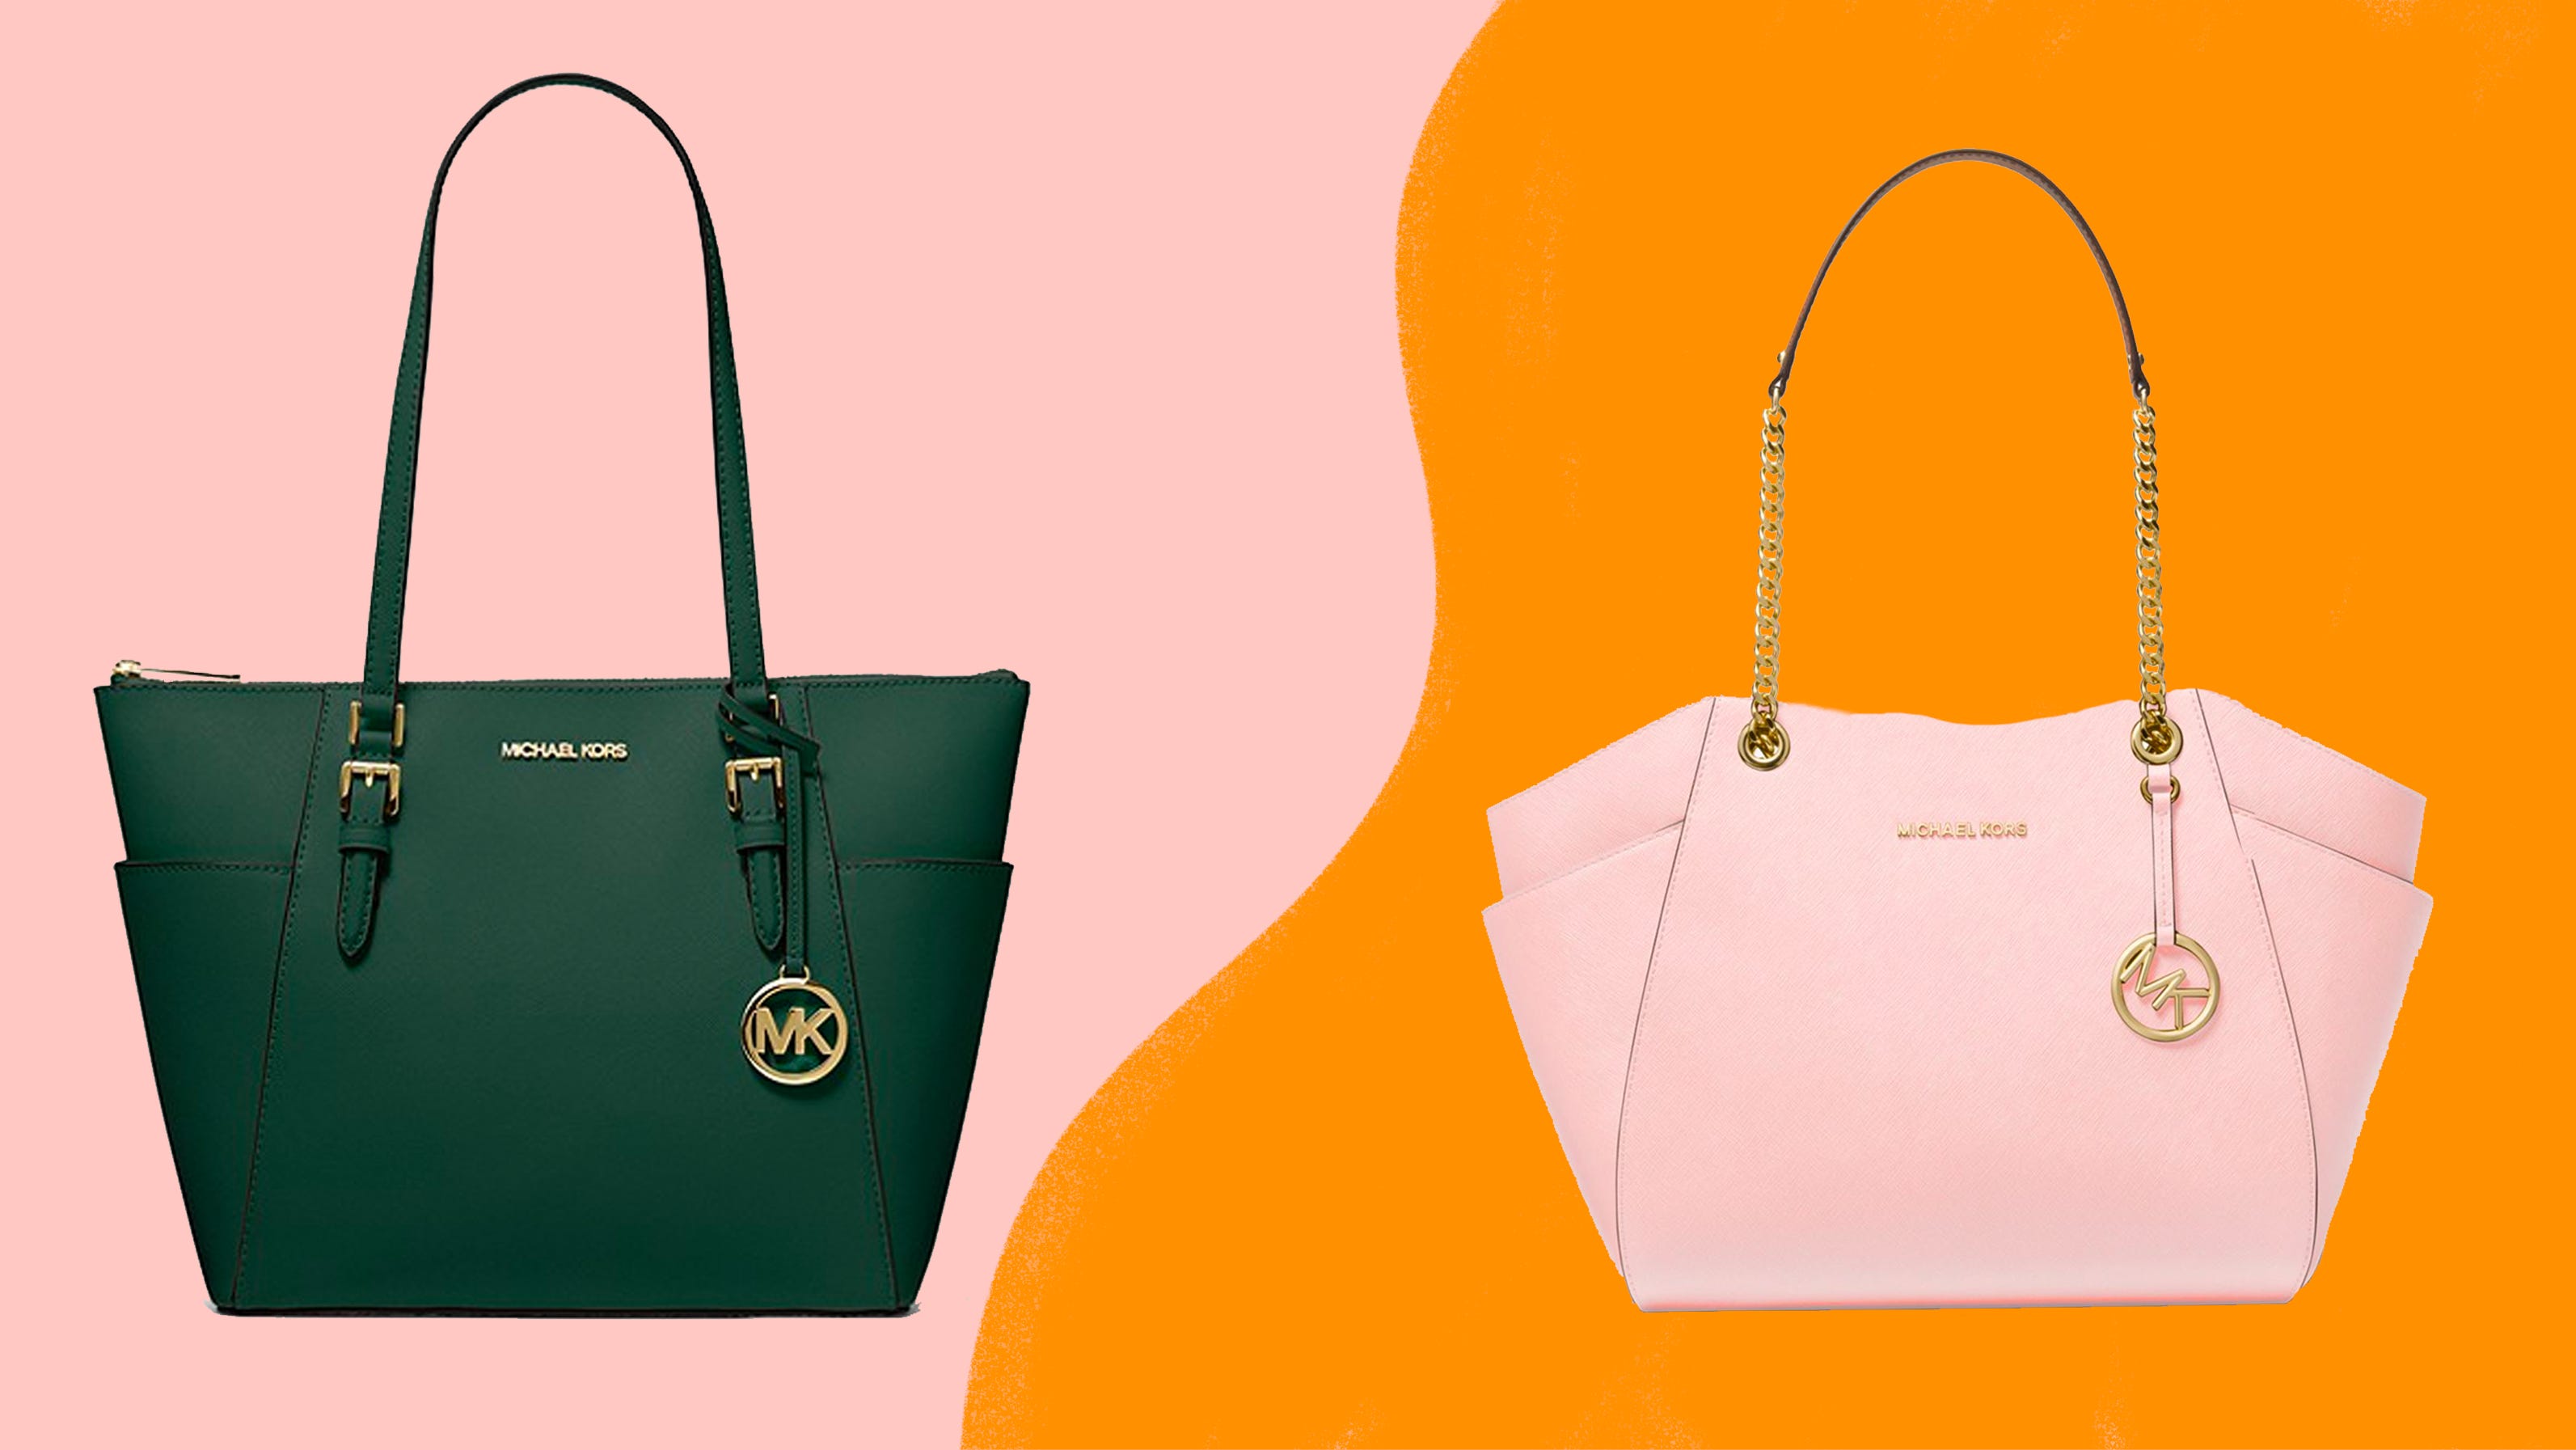 linned Donation Flere Michael Kors purse: Get purses, accessories and more at huge discounts